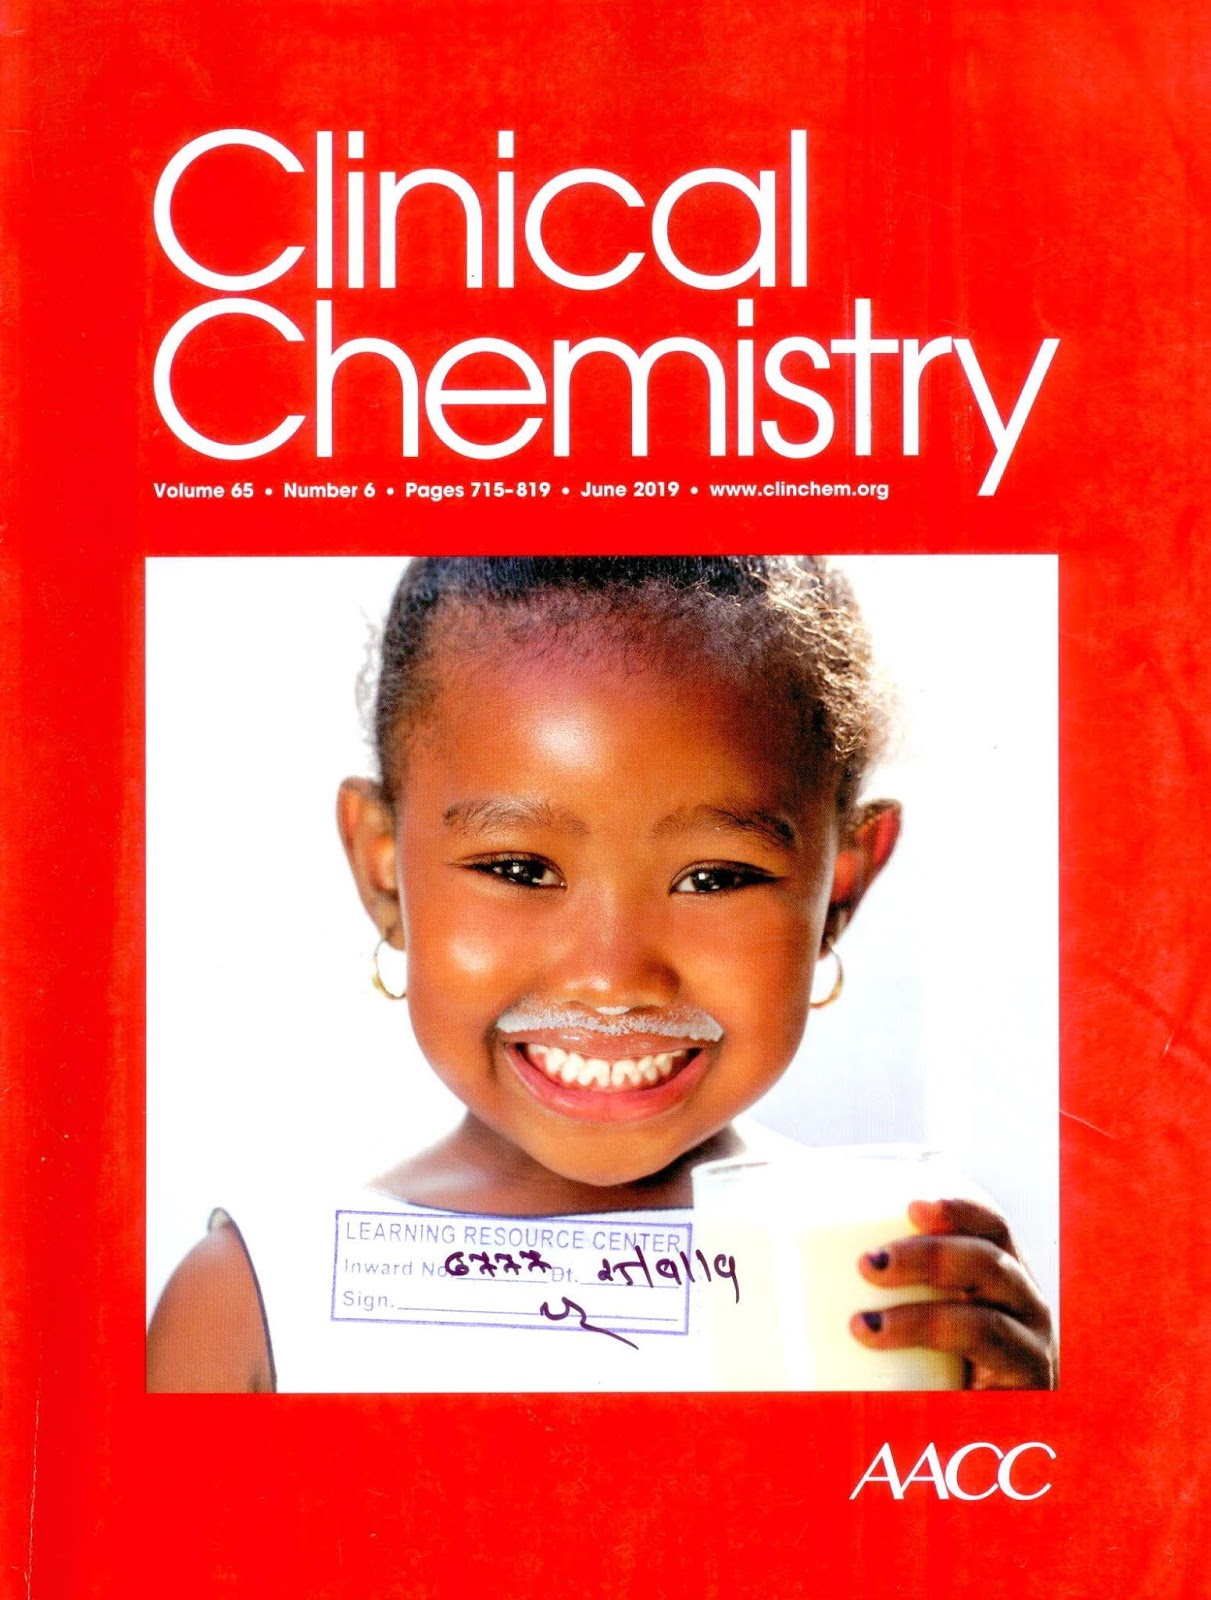 http://clinchem.aaccjnls.org/content/65/6